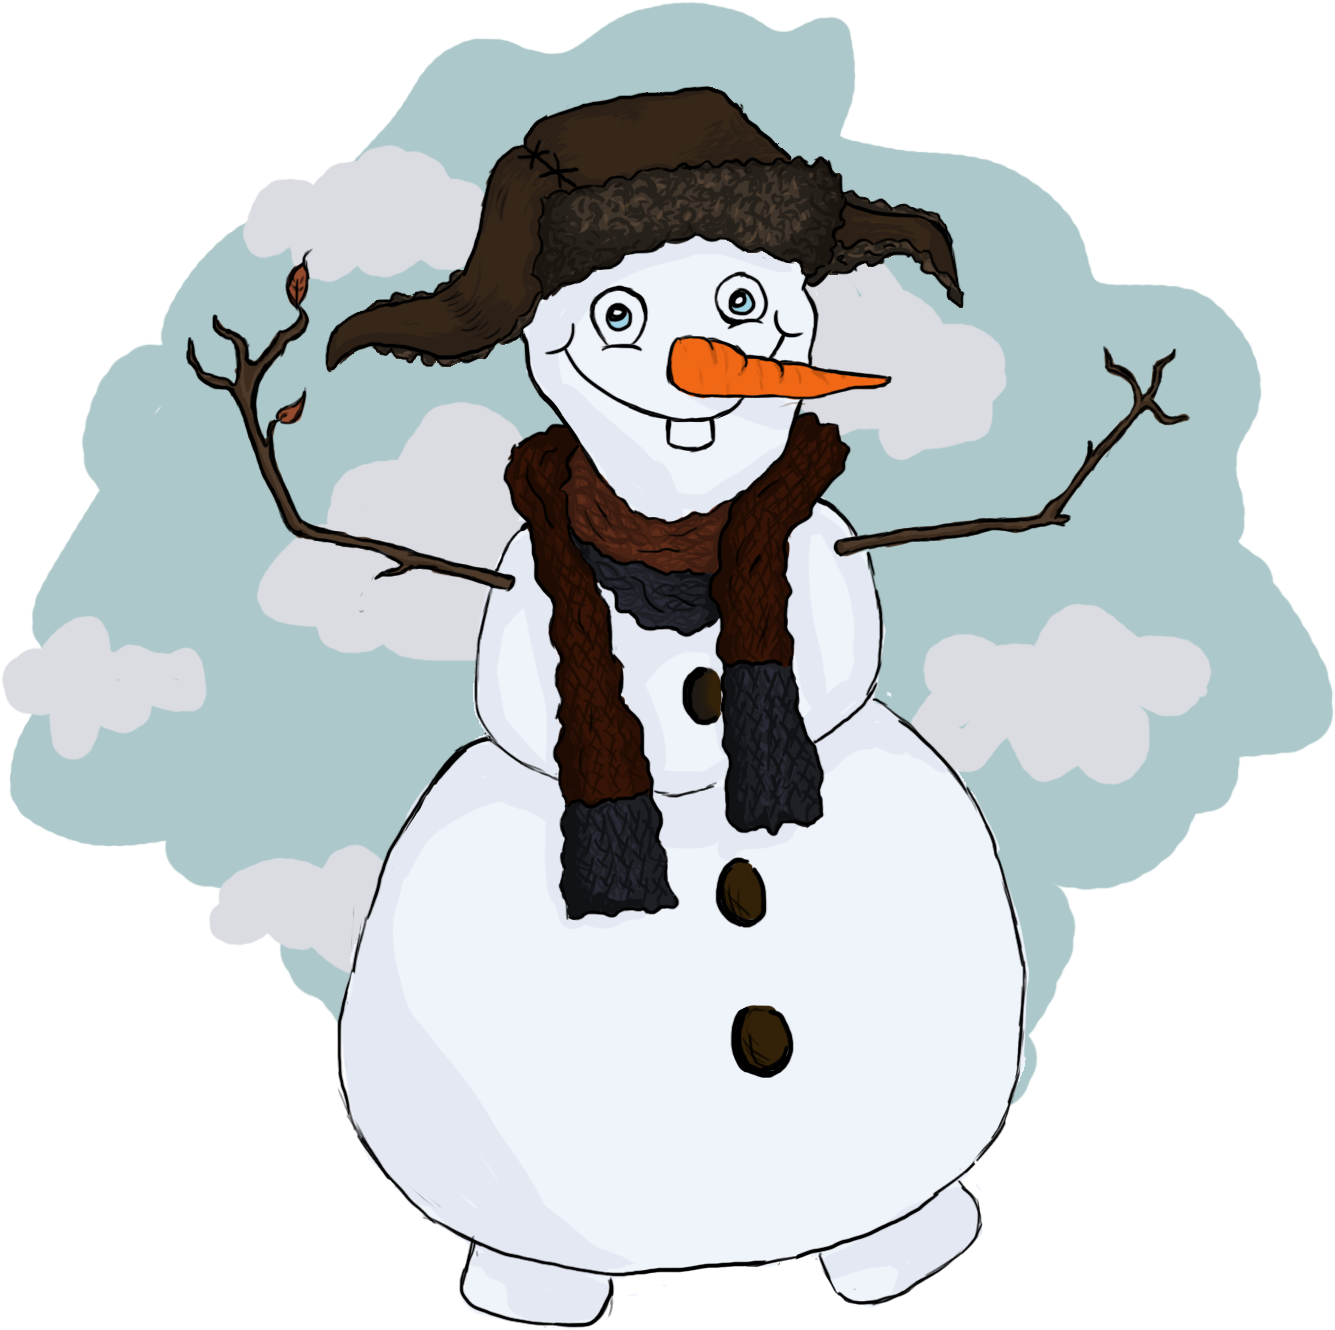 Jpg We Combined Your Favorite Dwarf With Snowman - Snowman (1404x1388)